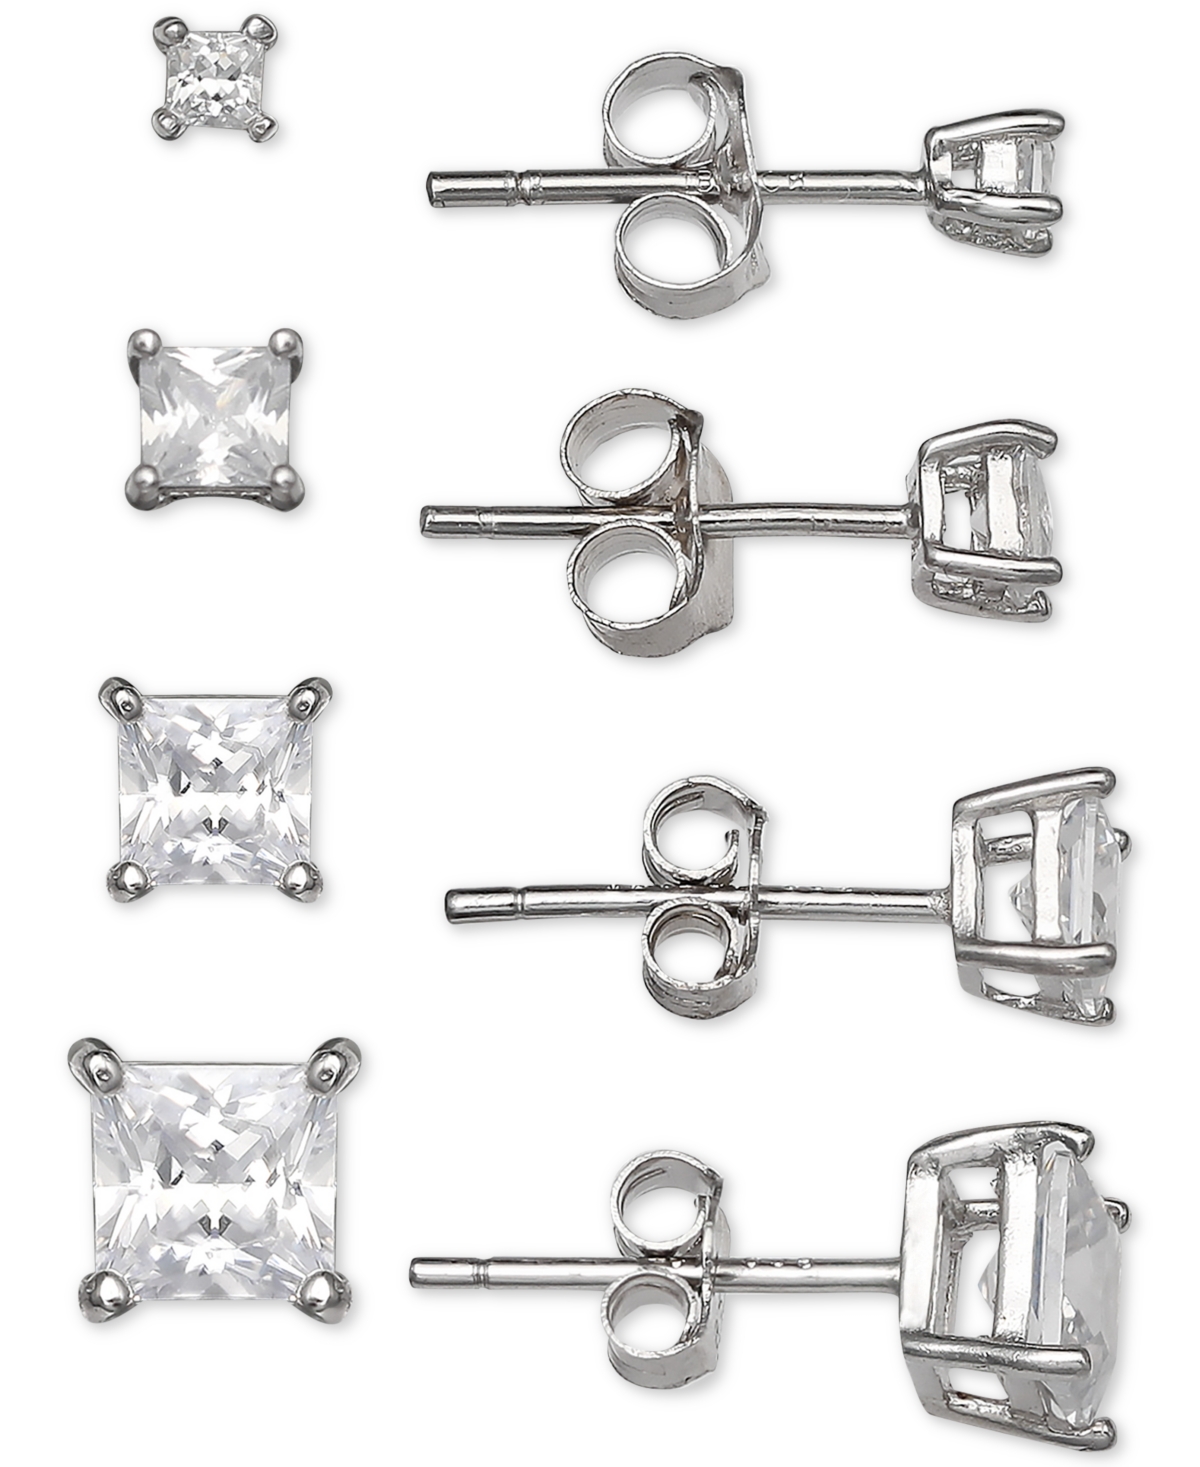 4-Pc. Set Cubic Zirconia Princess Stud Earrings in Sterling Silver, Created for Macy's - Silver